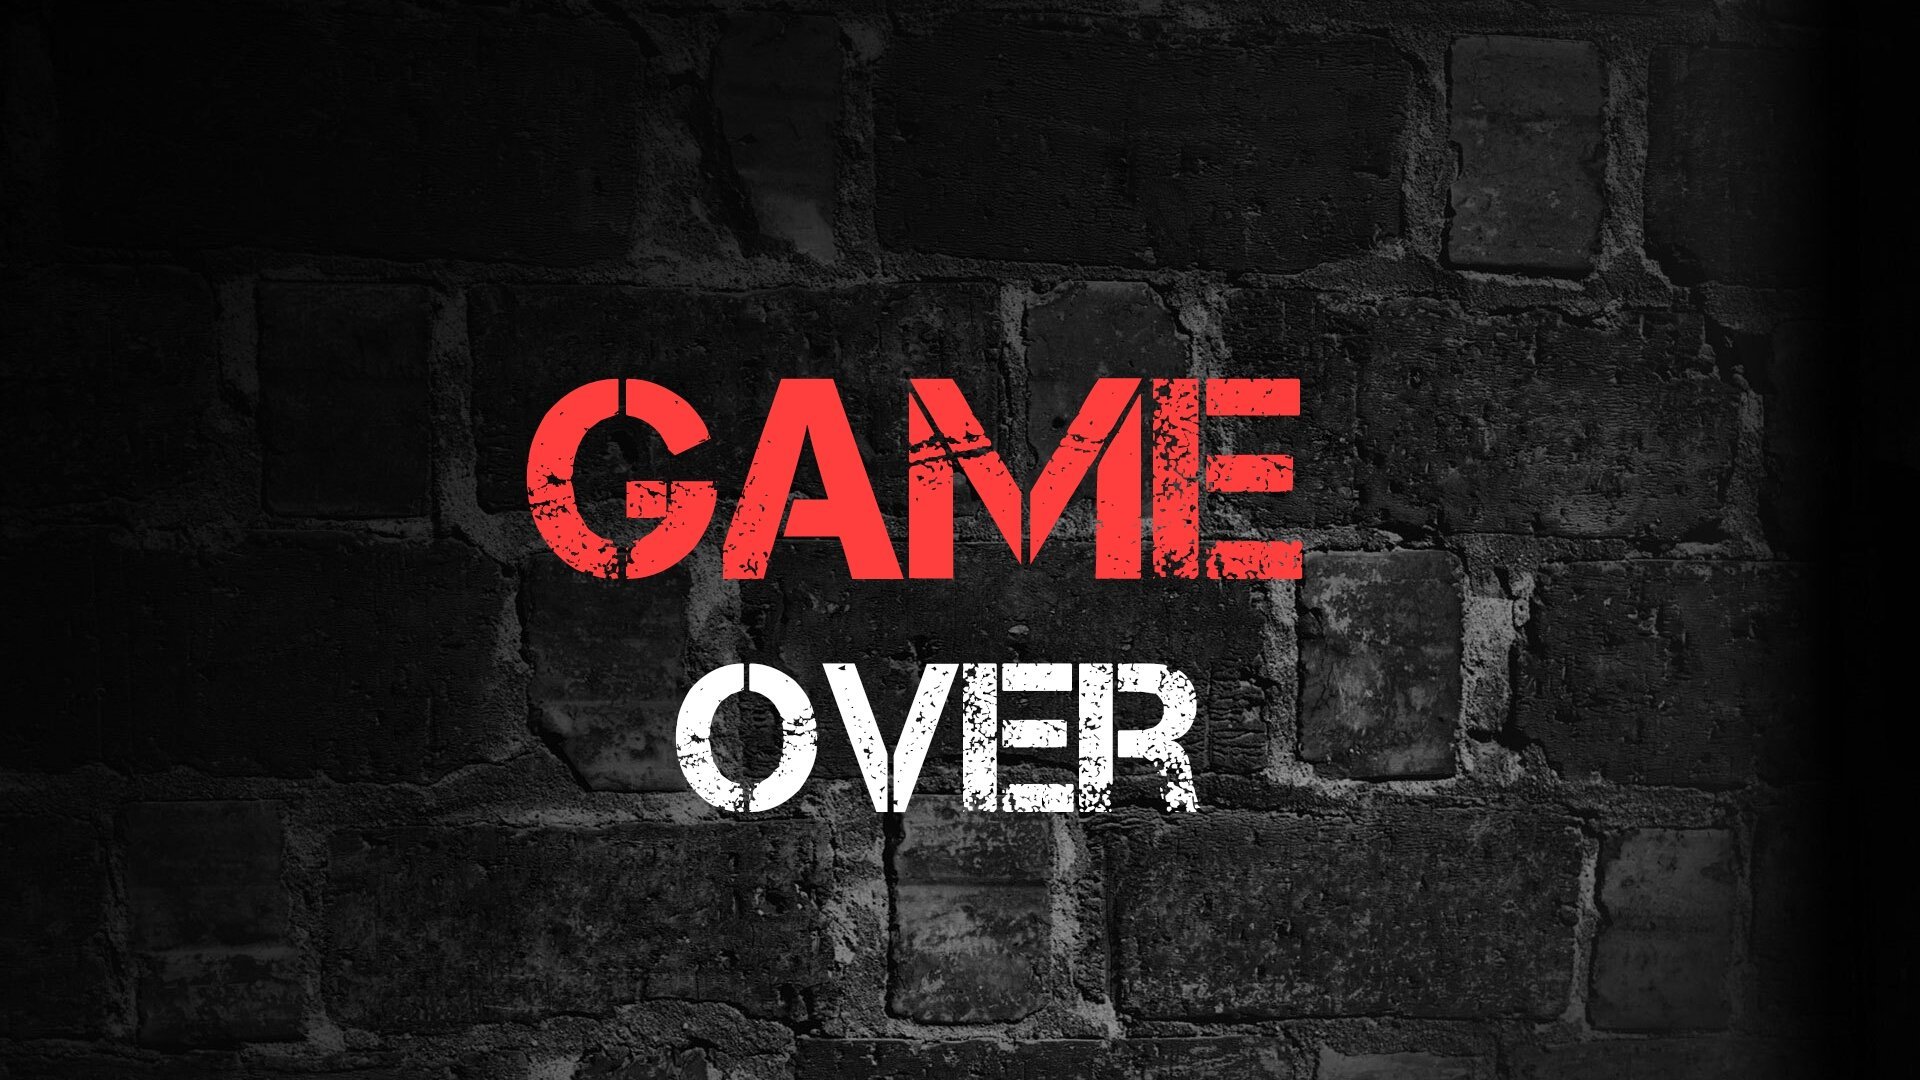 All over a game. Game over. Game over картинка. Надпись гейм овер. Geym OVR.